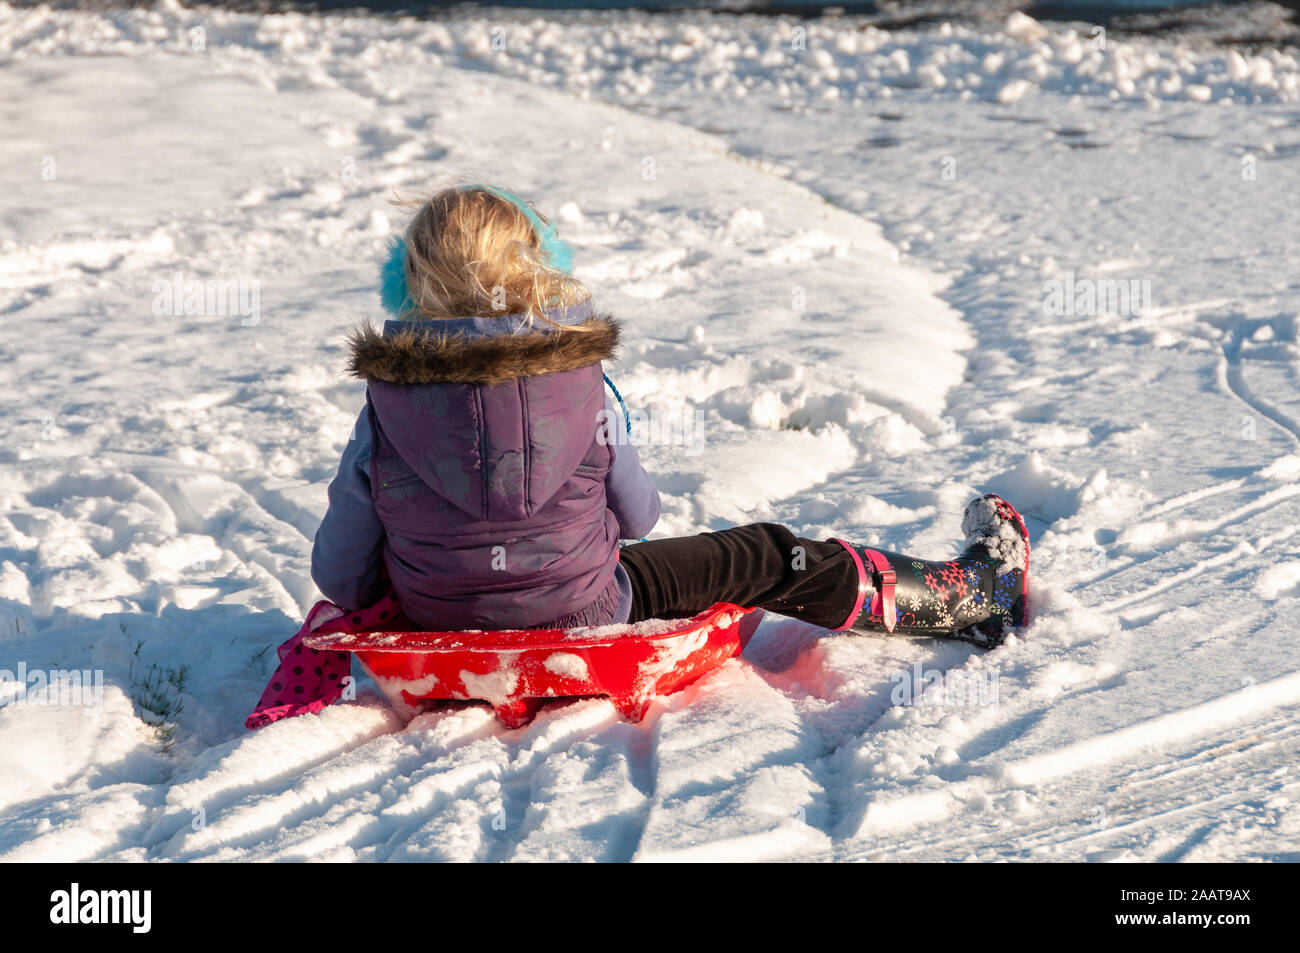 View from behind of young girl sledging Stock Photo